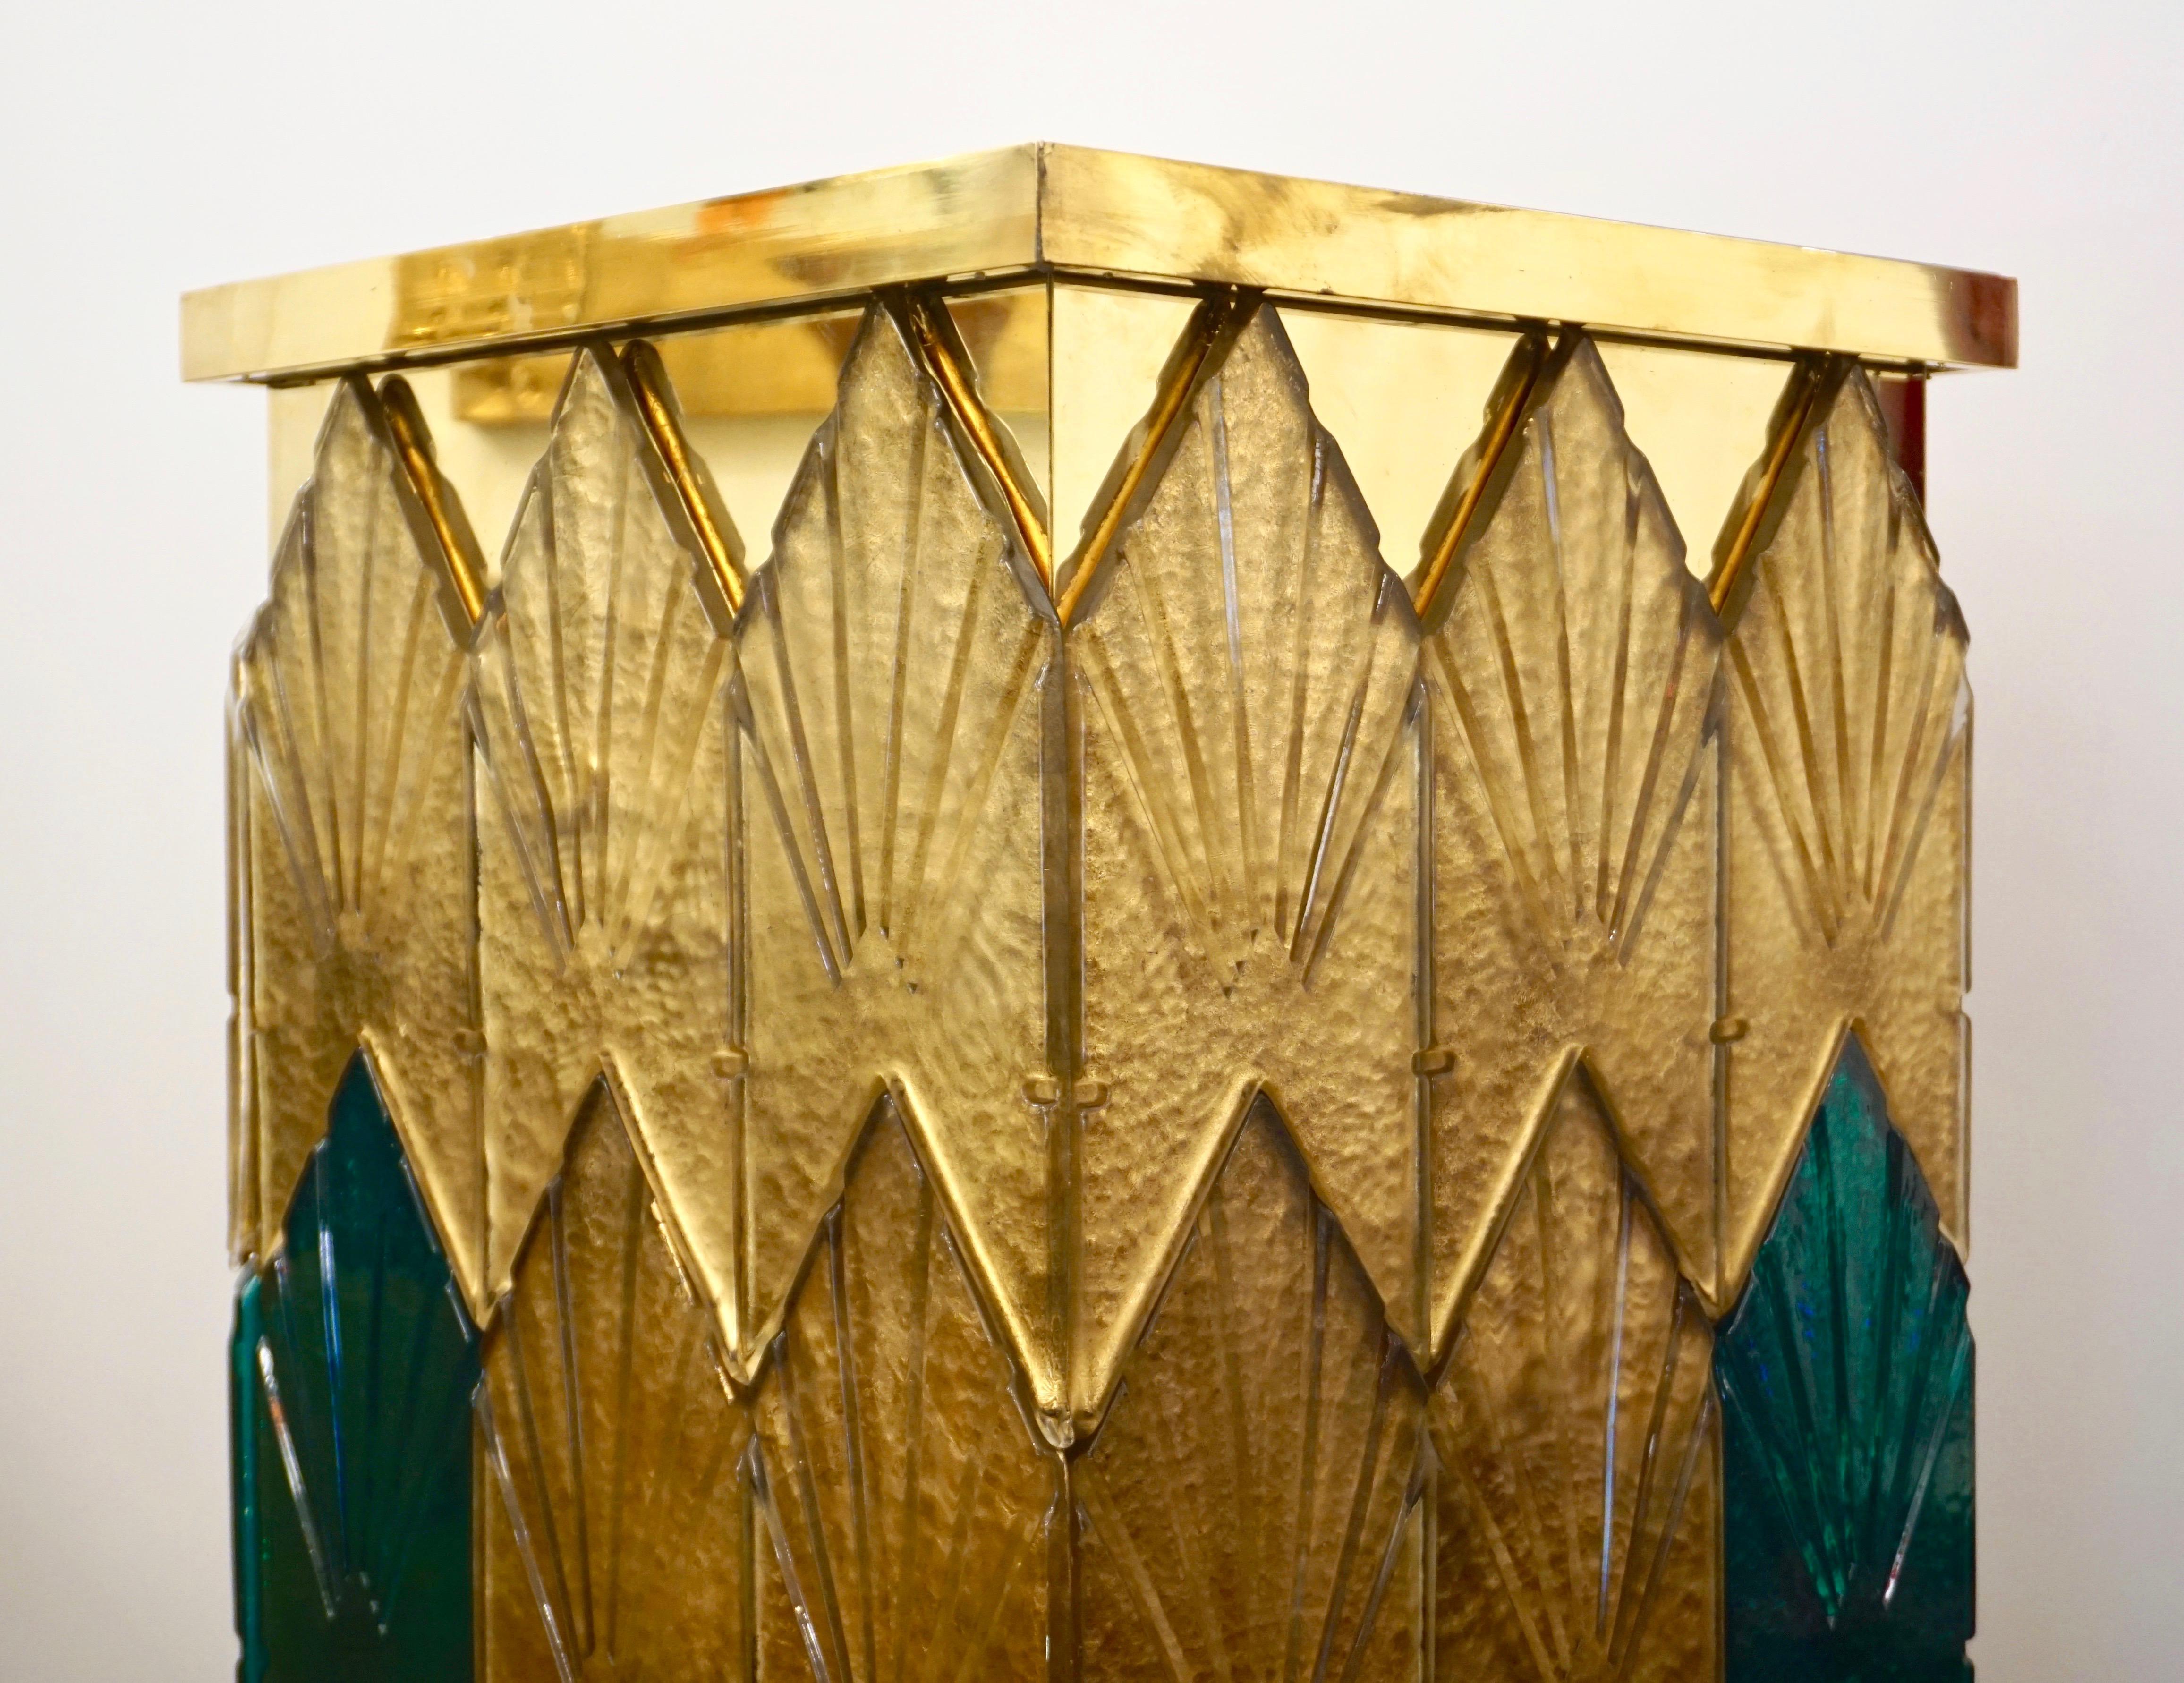 Bespoke Italian Art Deco Style Green Gold Murano Glass Brass and Wood Pedestals In Excellent Condition For Sale In New York, NY